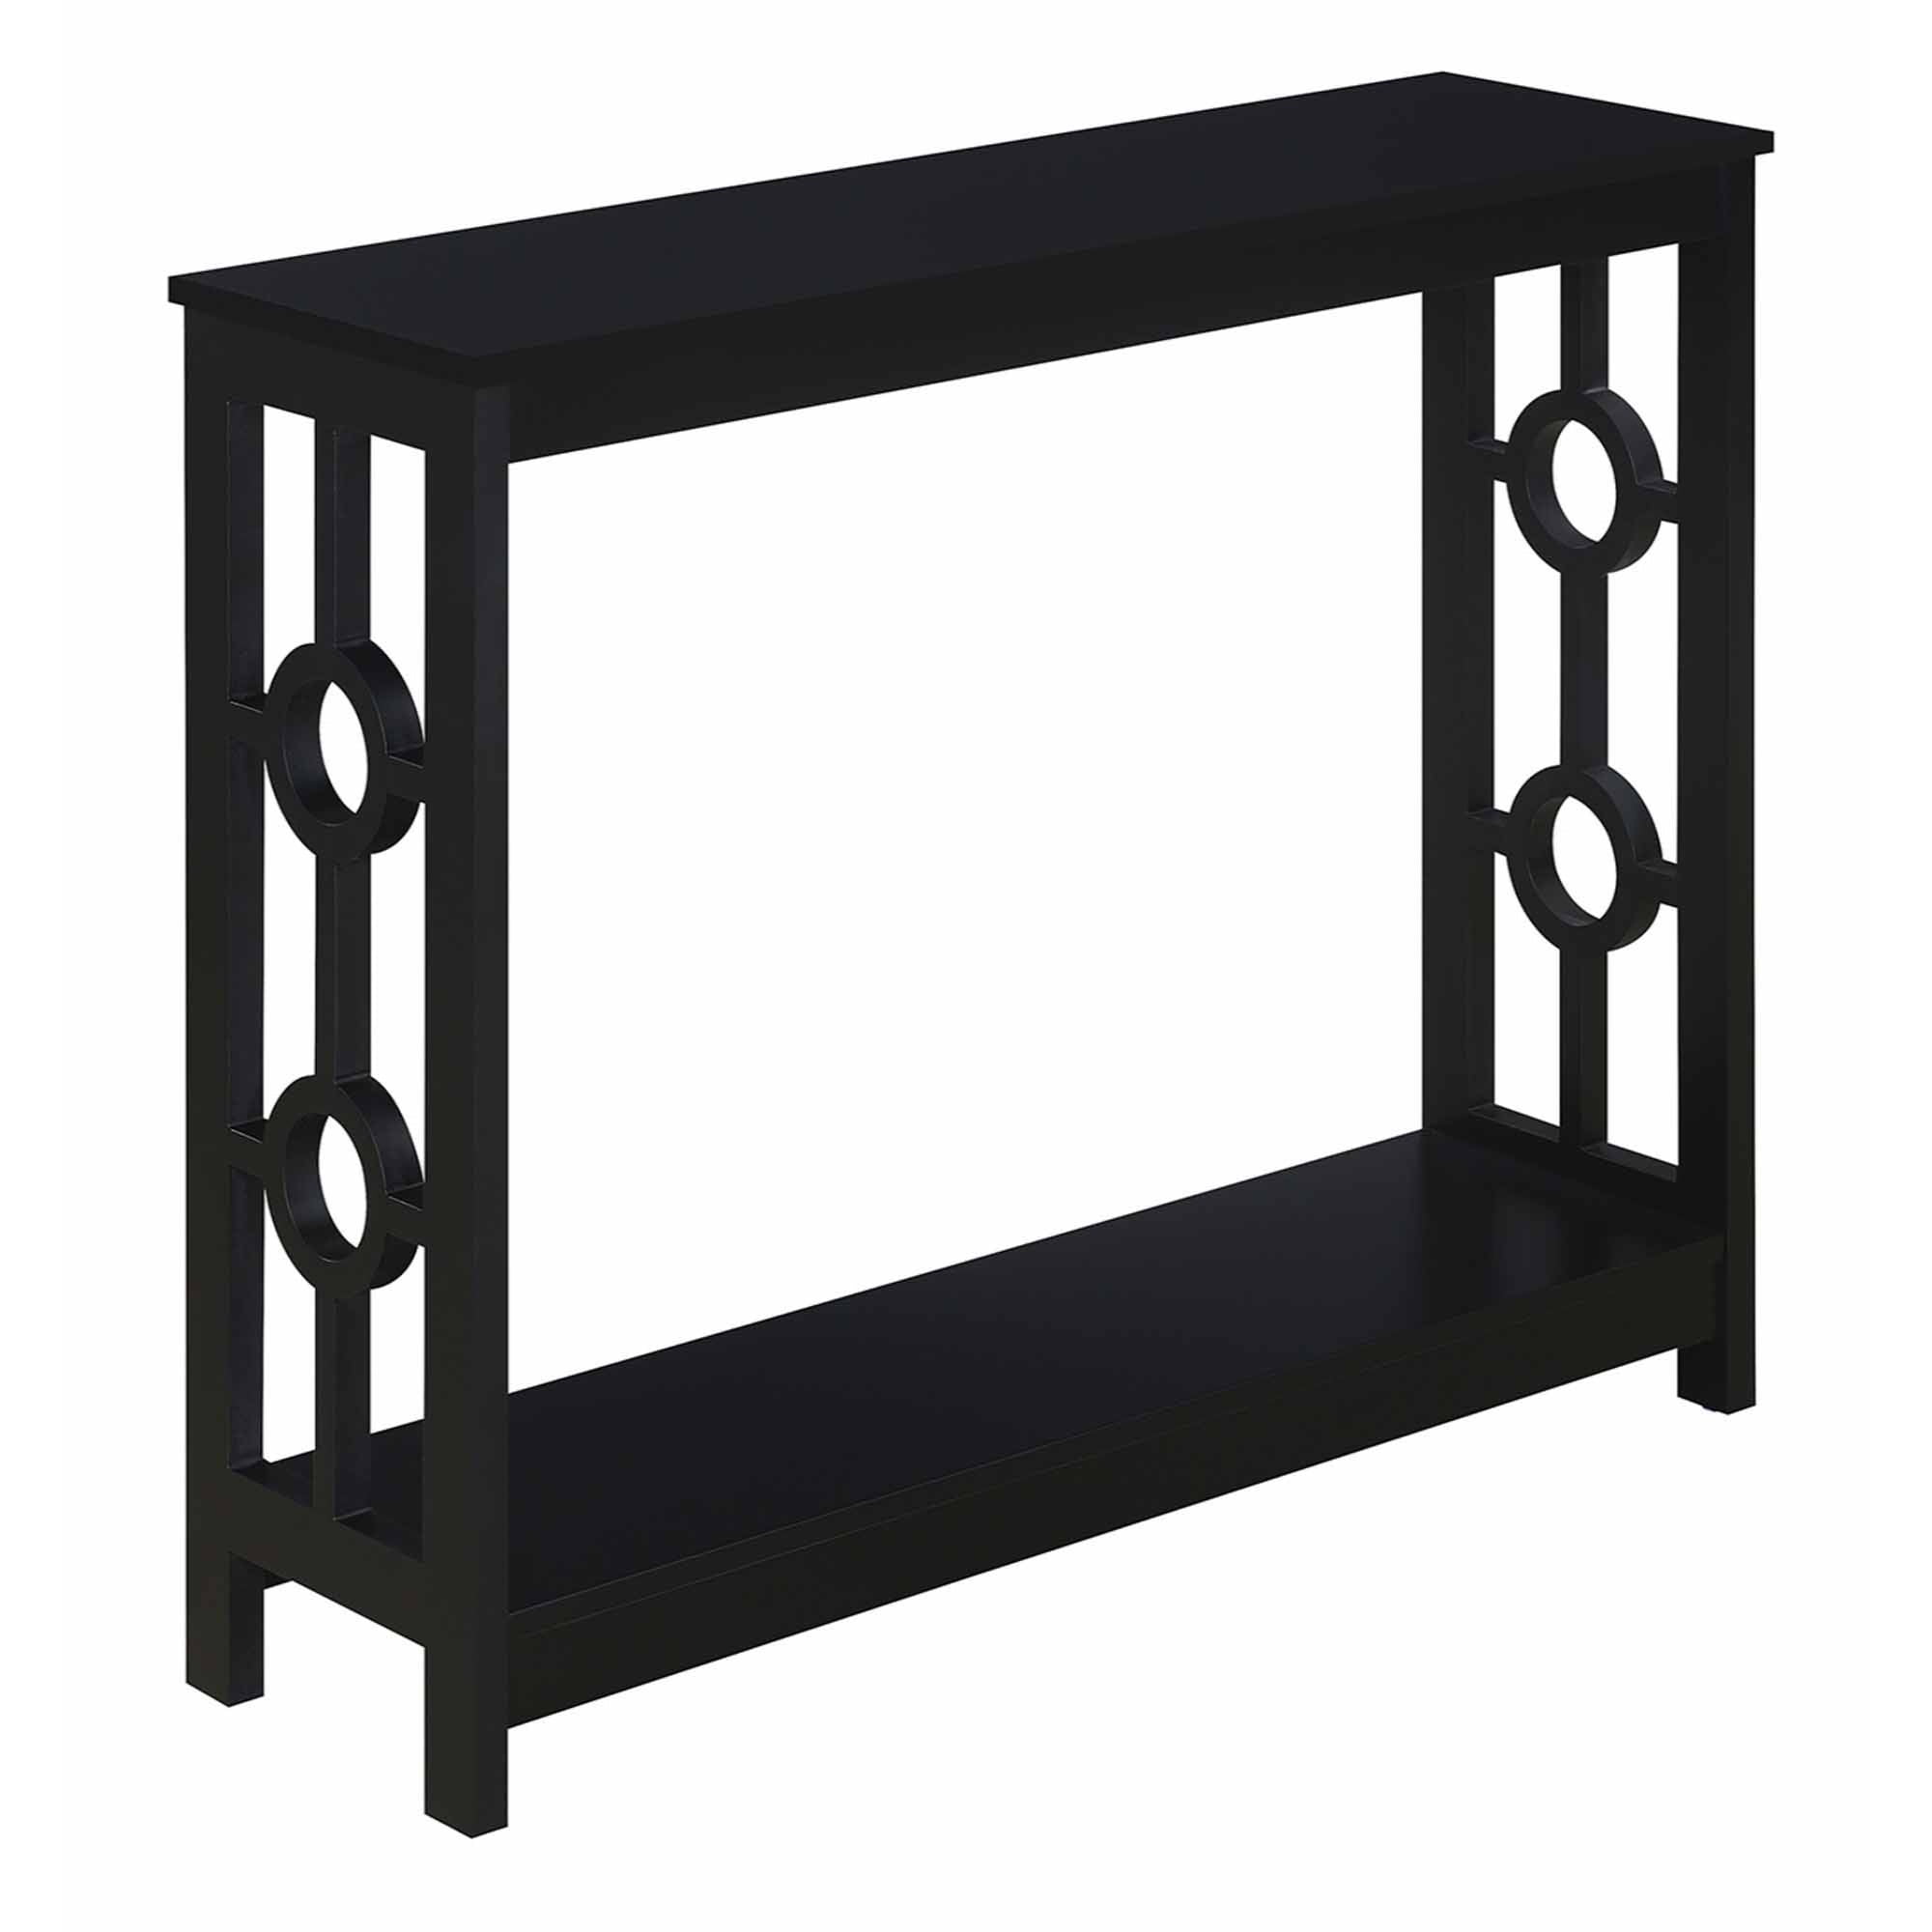 Convenience Concepts Ring Console Table Black